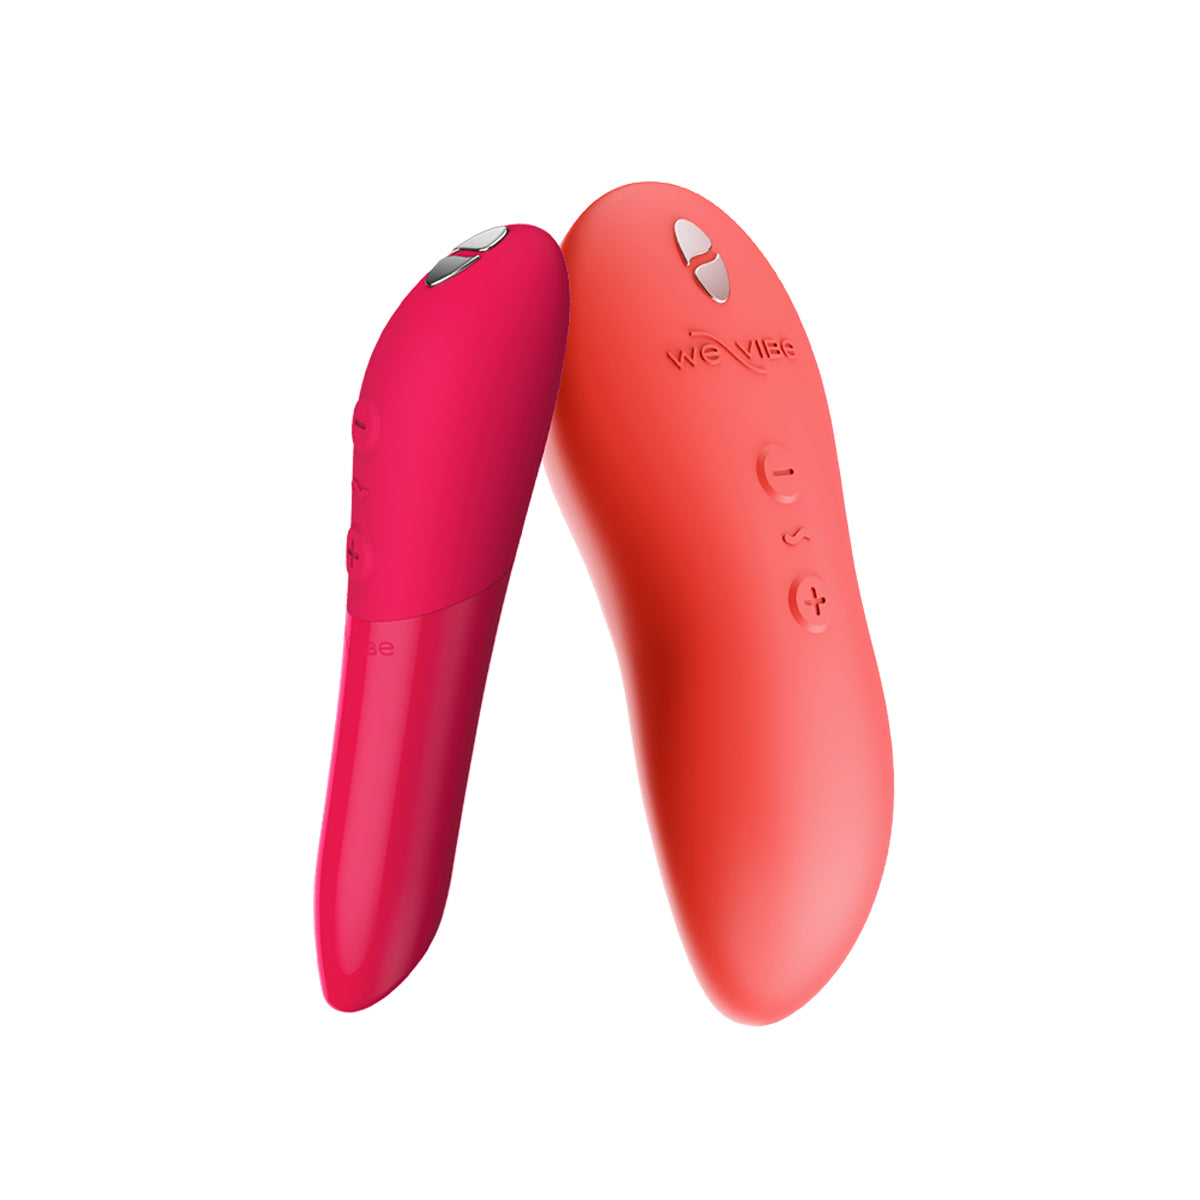 We-Vibe Intimacy Devices We-Vibe Forever Favorites Red/Coral Set